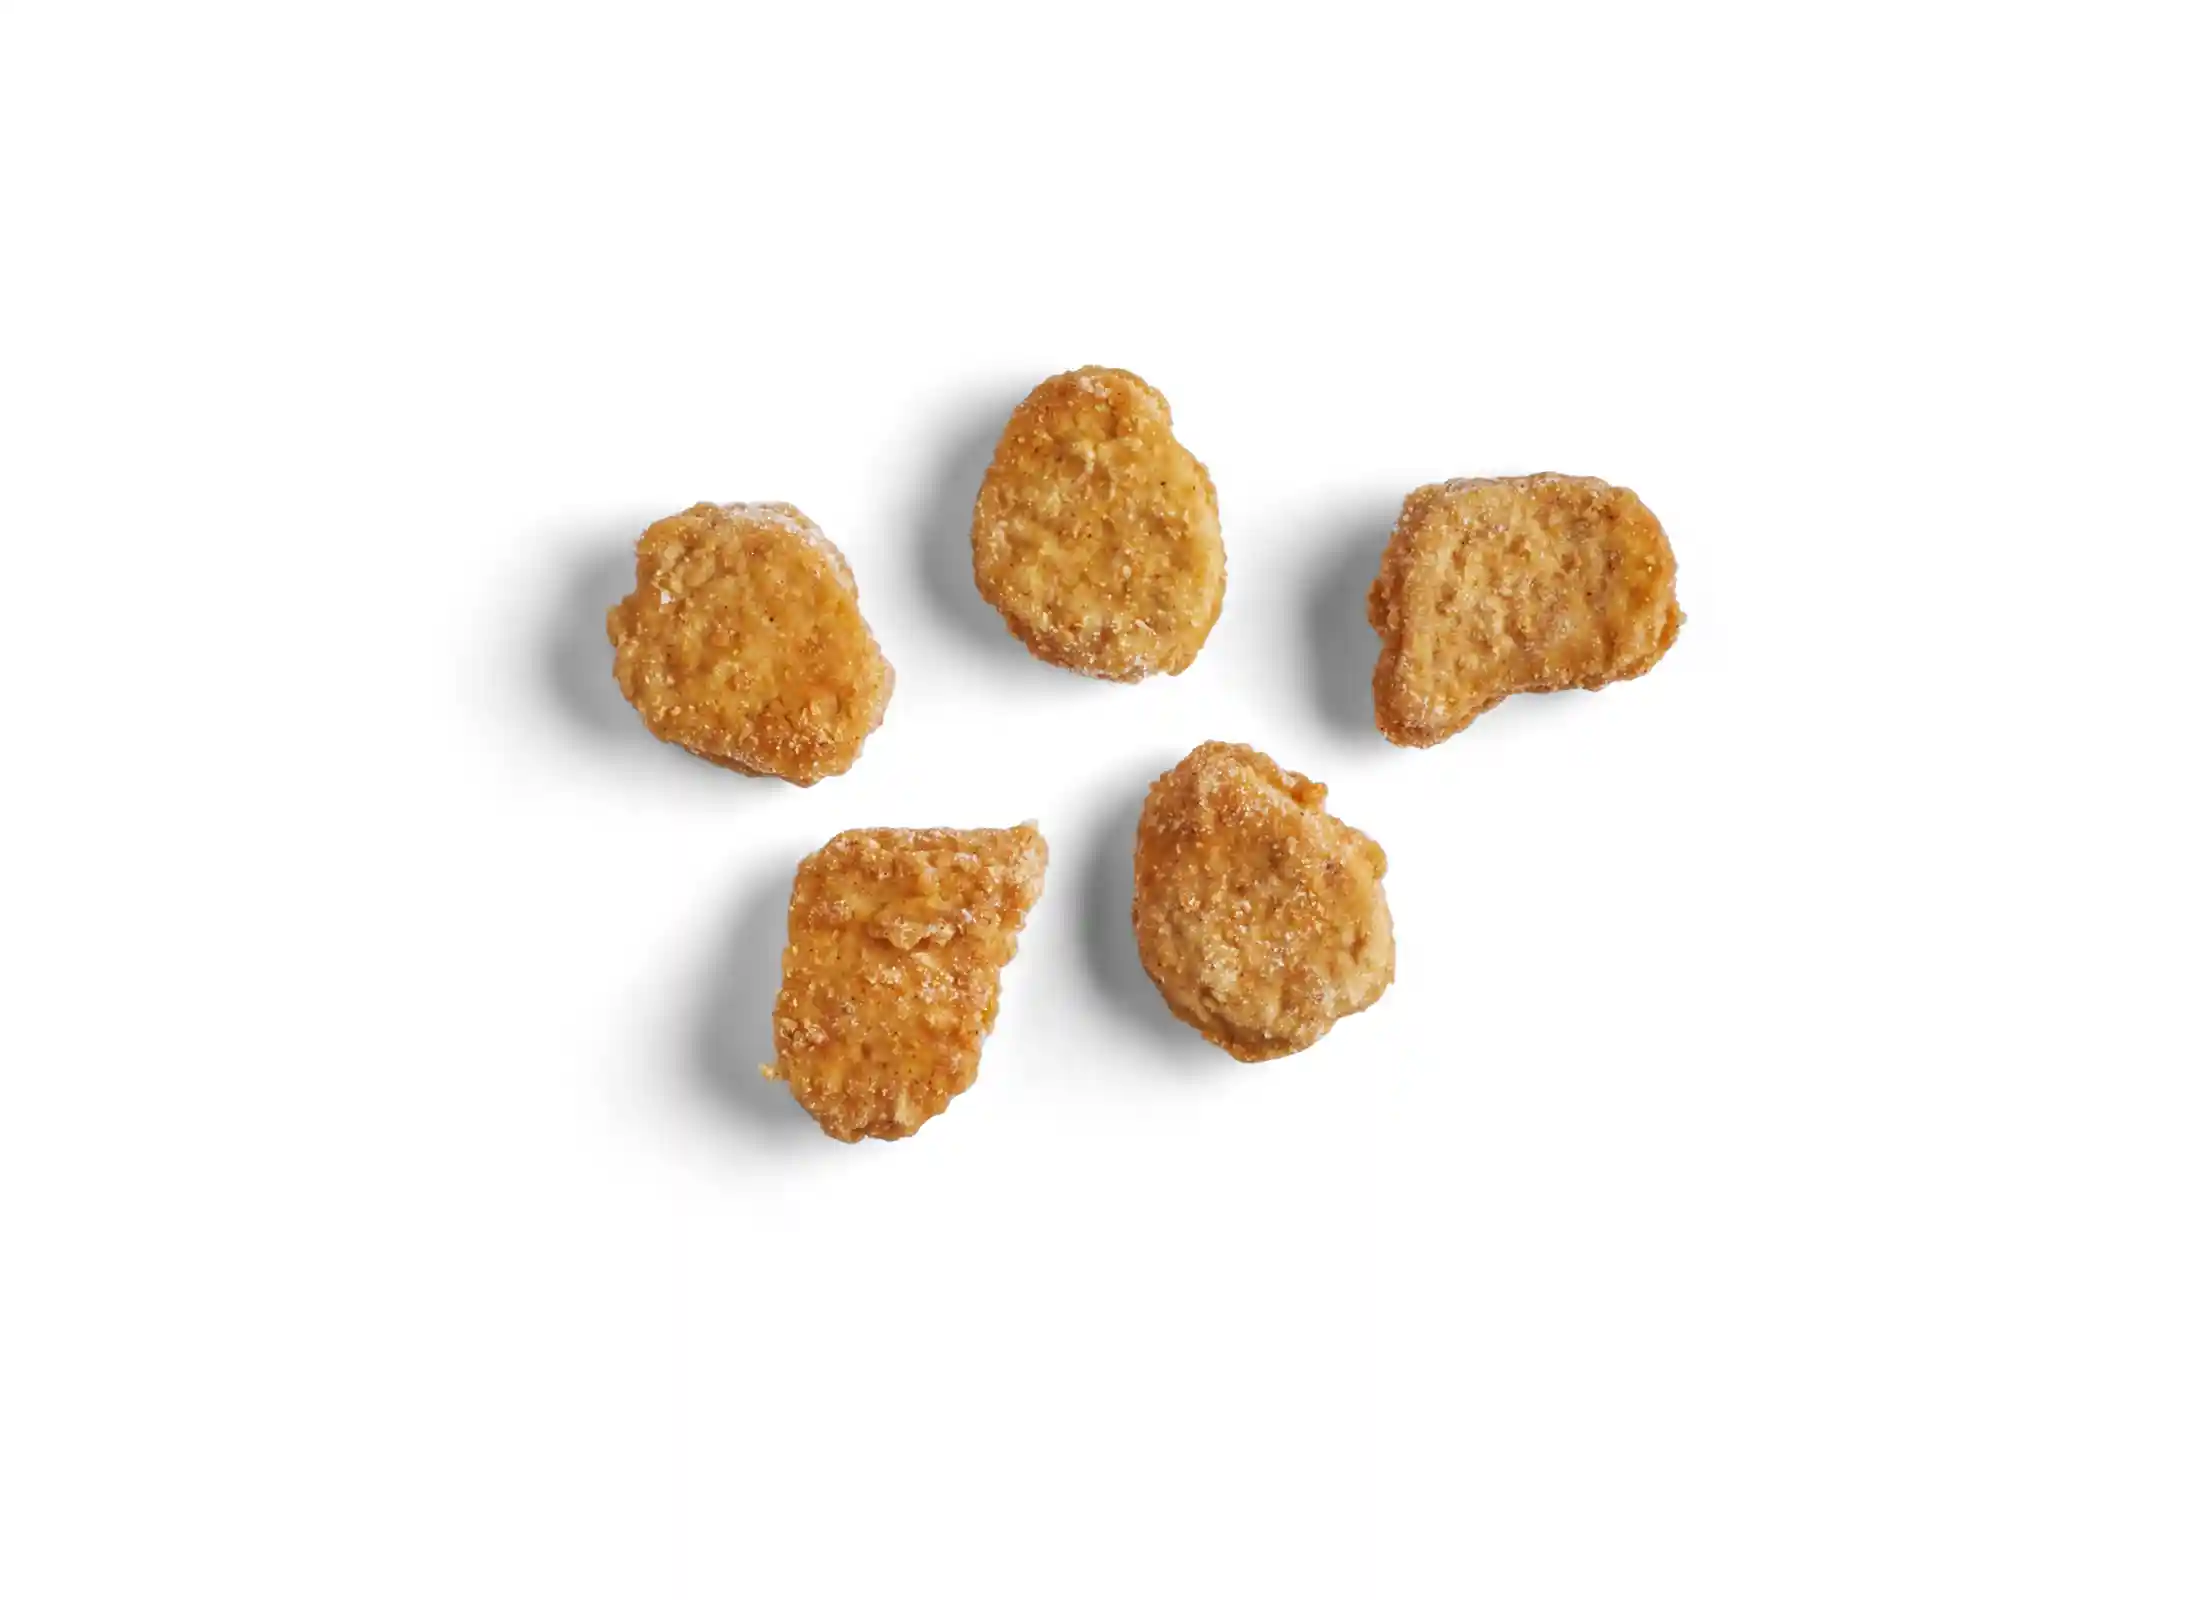 Tyson® Fully Cooked Whole Grain Breaded Chicken Nuggets, CN, 0.66 oz. _image_11